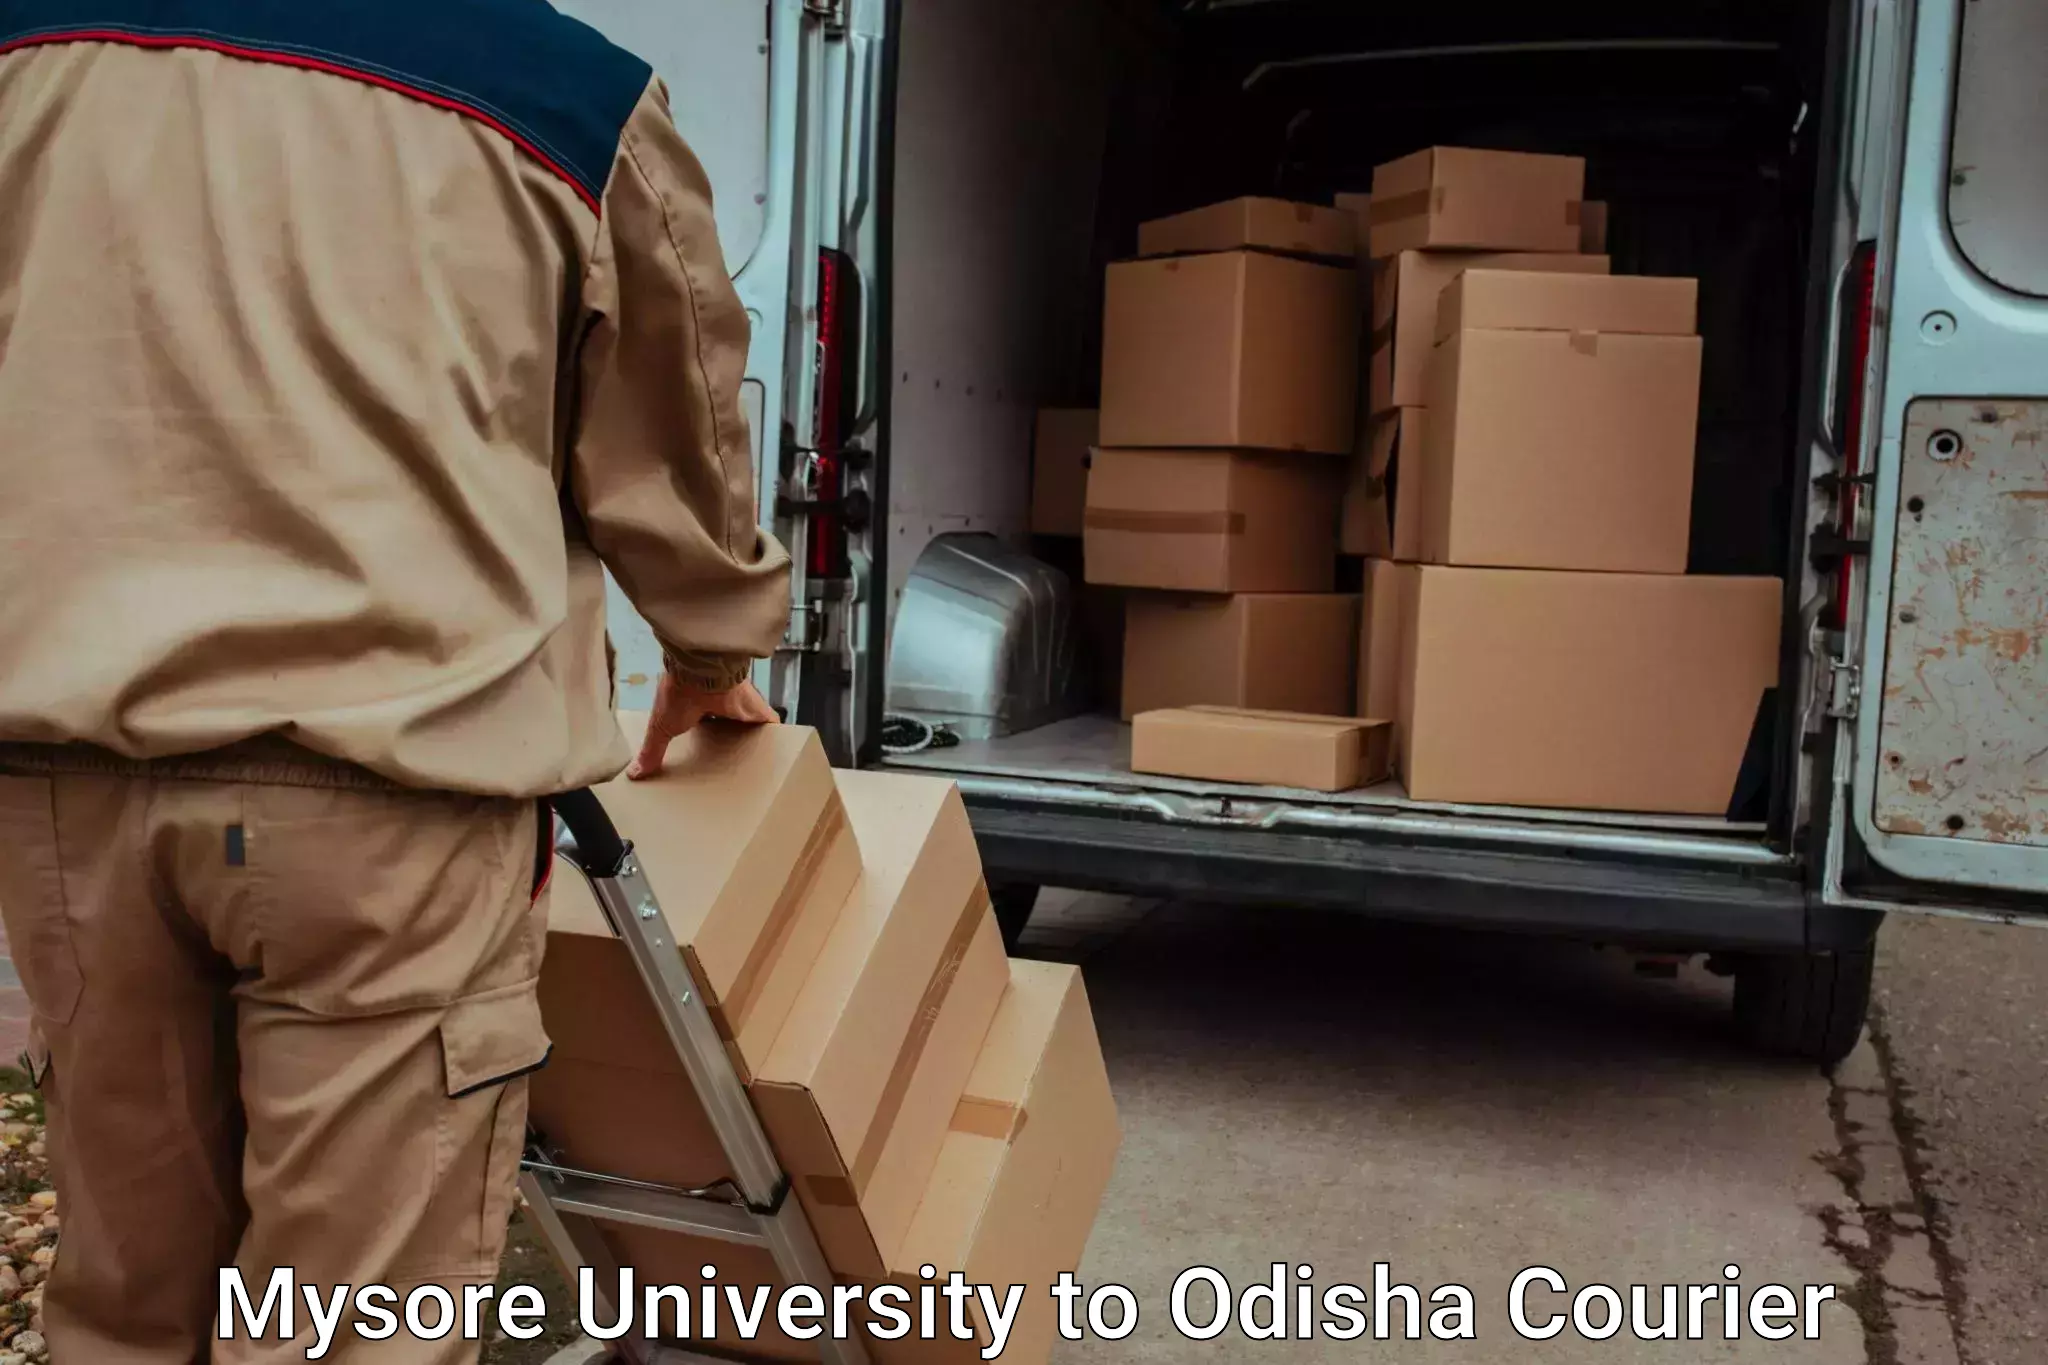 Professional movers and packers Mysore University to Odisha